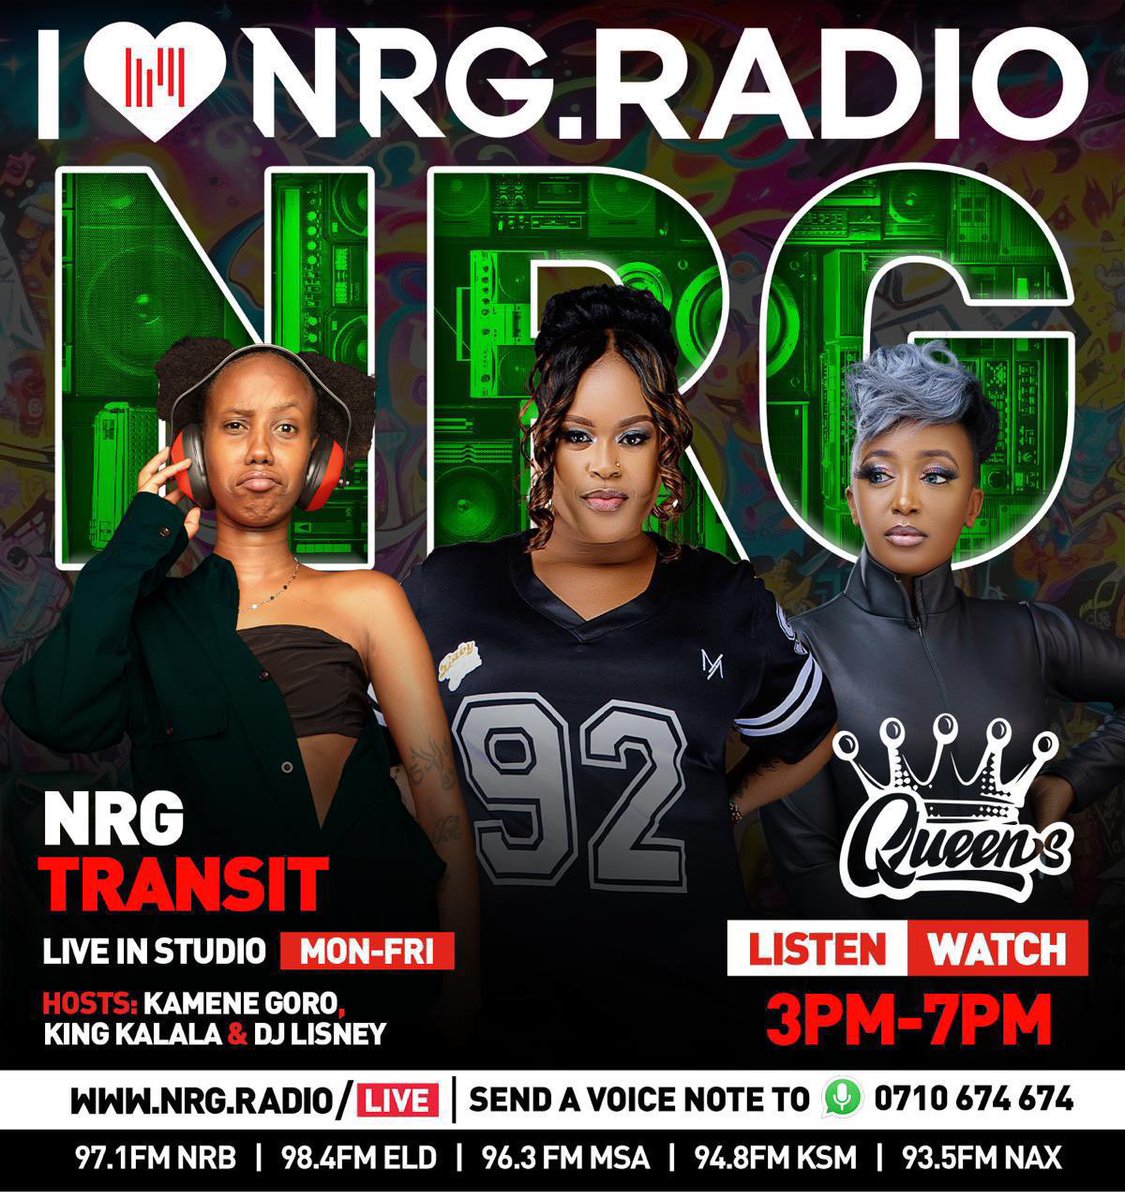 A new Day,,New week!! What do you think the Transit Queens got Ins-tore for us🥳🥳 Tune in from 3pm-7pm. @djlisney @KameneGoro @KING__KALALA #NRGTransitQueens #NRGRadioKenya #NRGTransit #NRGSupernova6 #NRGAt6